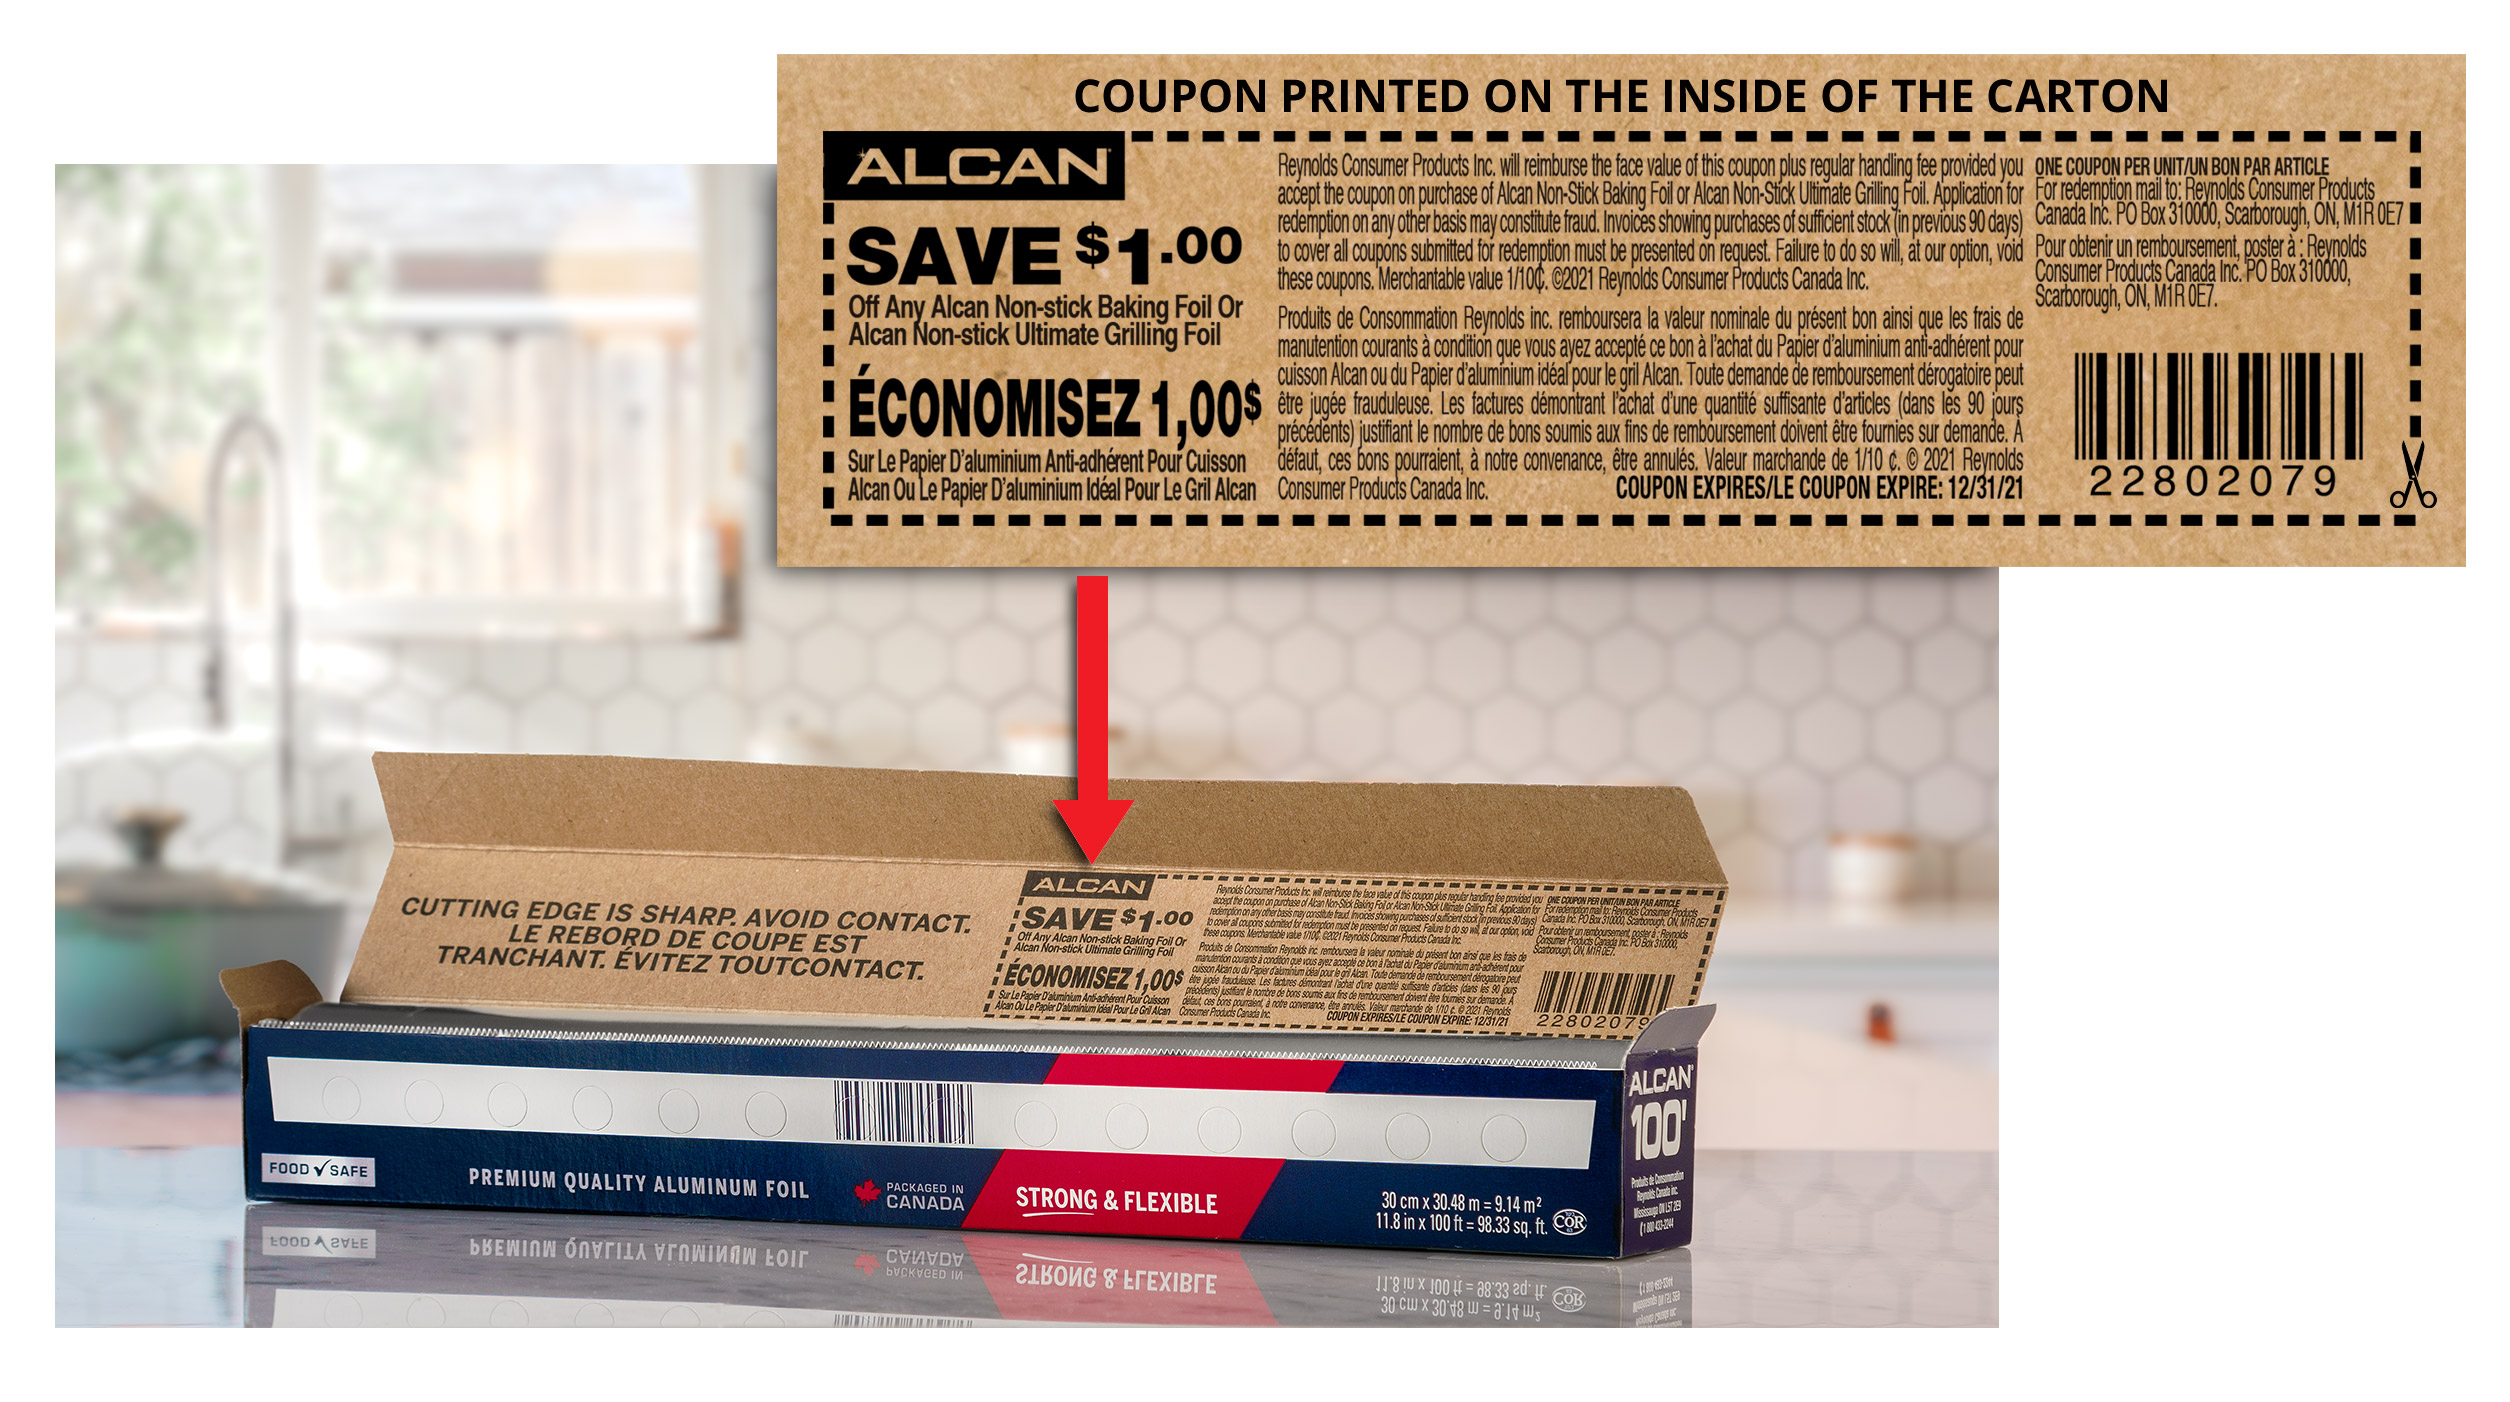 ALCAN Coupon Instructions